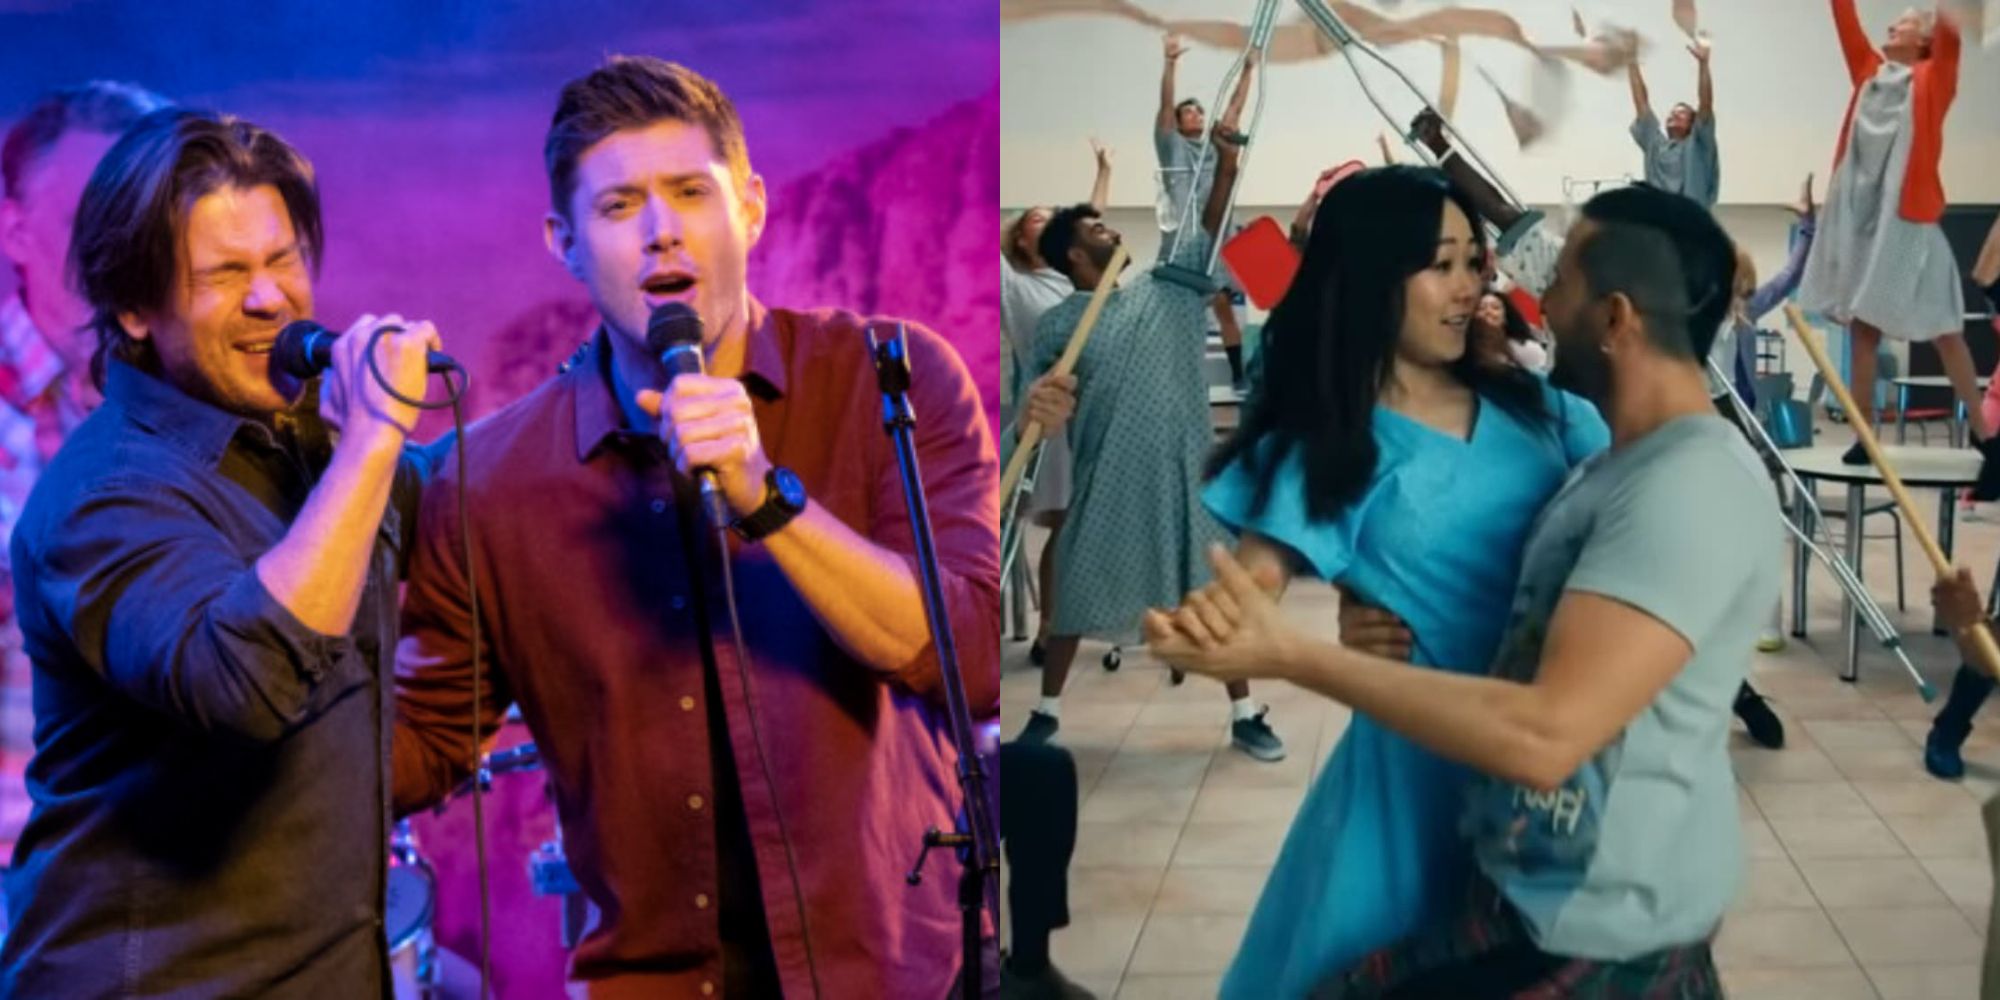 Split image showing characters from Supernatural and The Boys singing.